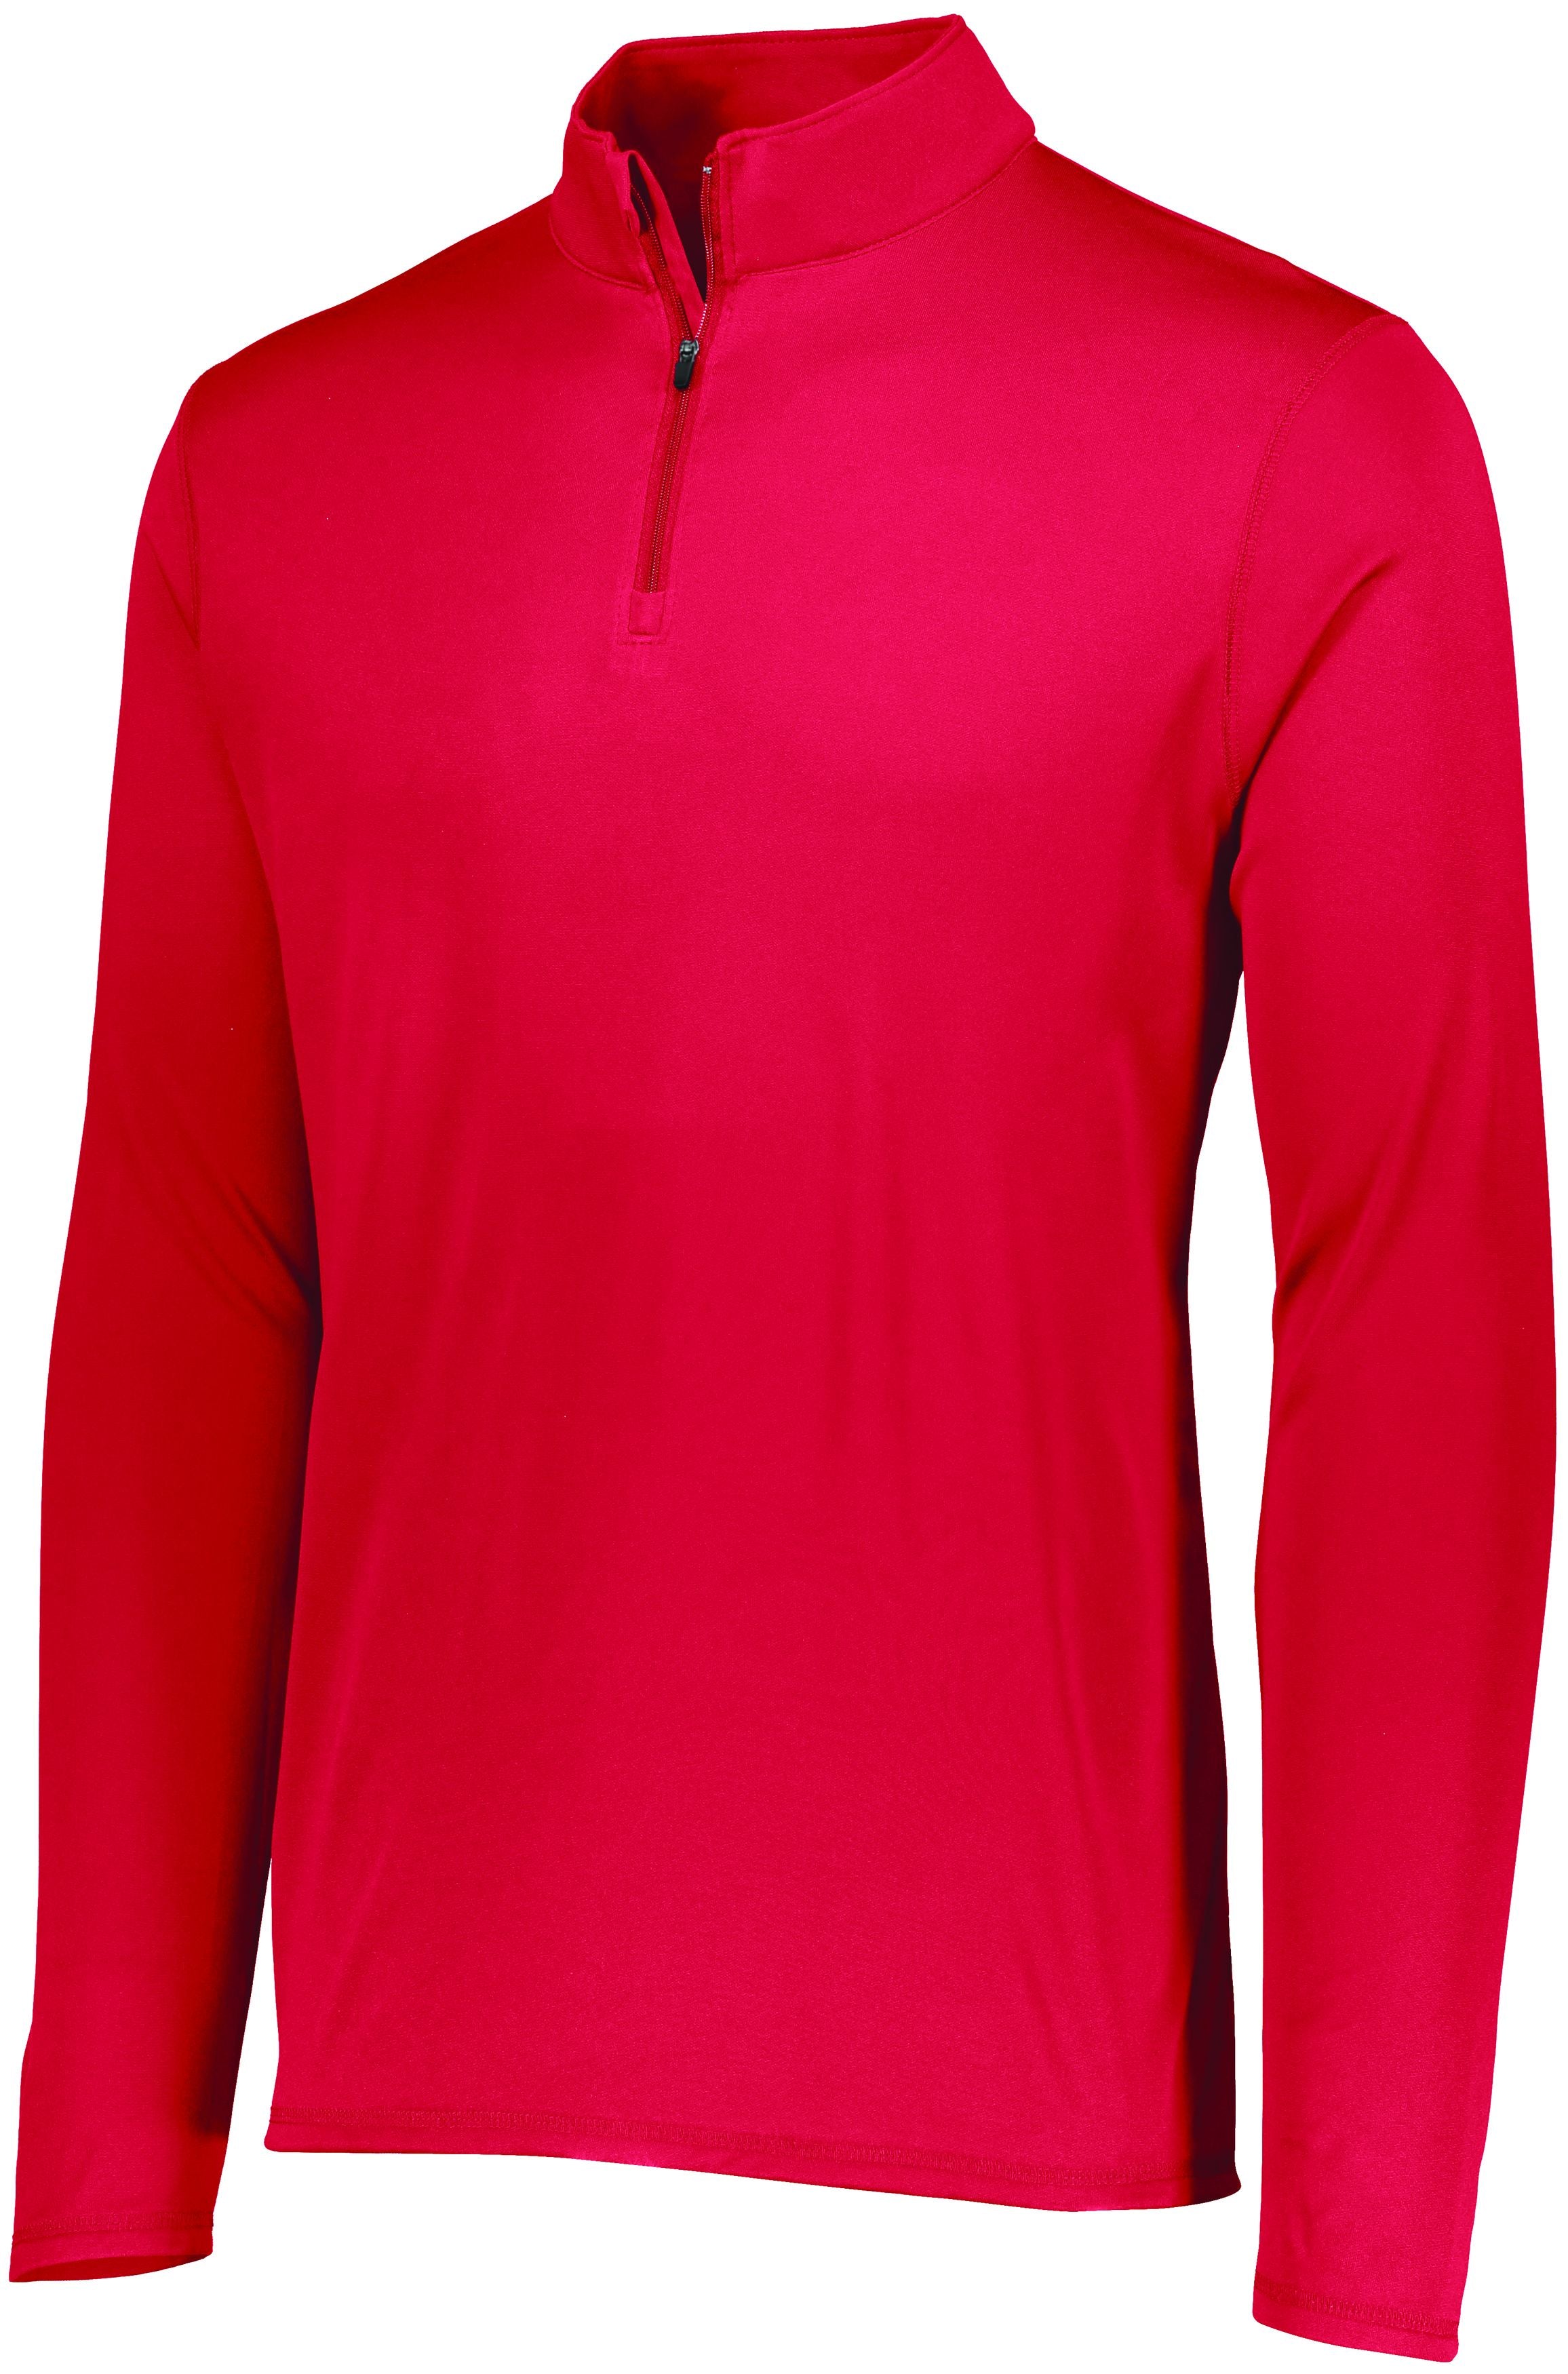 Augusta Sportswear Attain Wicking 1/4 Zip Pullover in Red  -Part of the Adult, Adult-Pullover, Augusta-Products, Outerwear product lines at KanaleyCreations.com